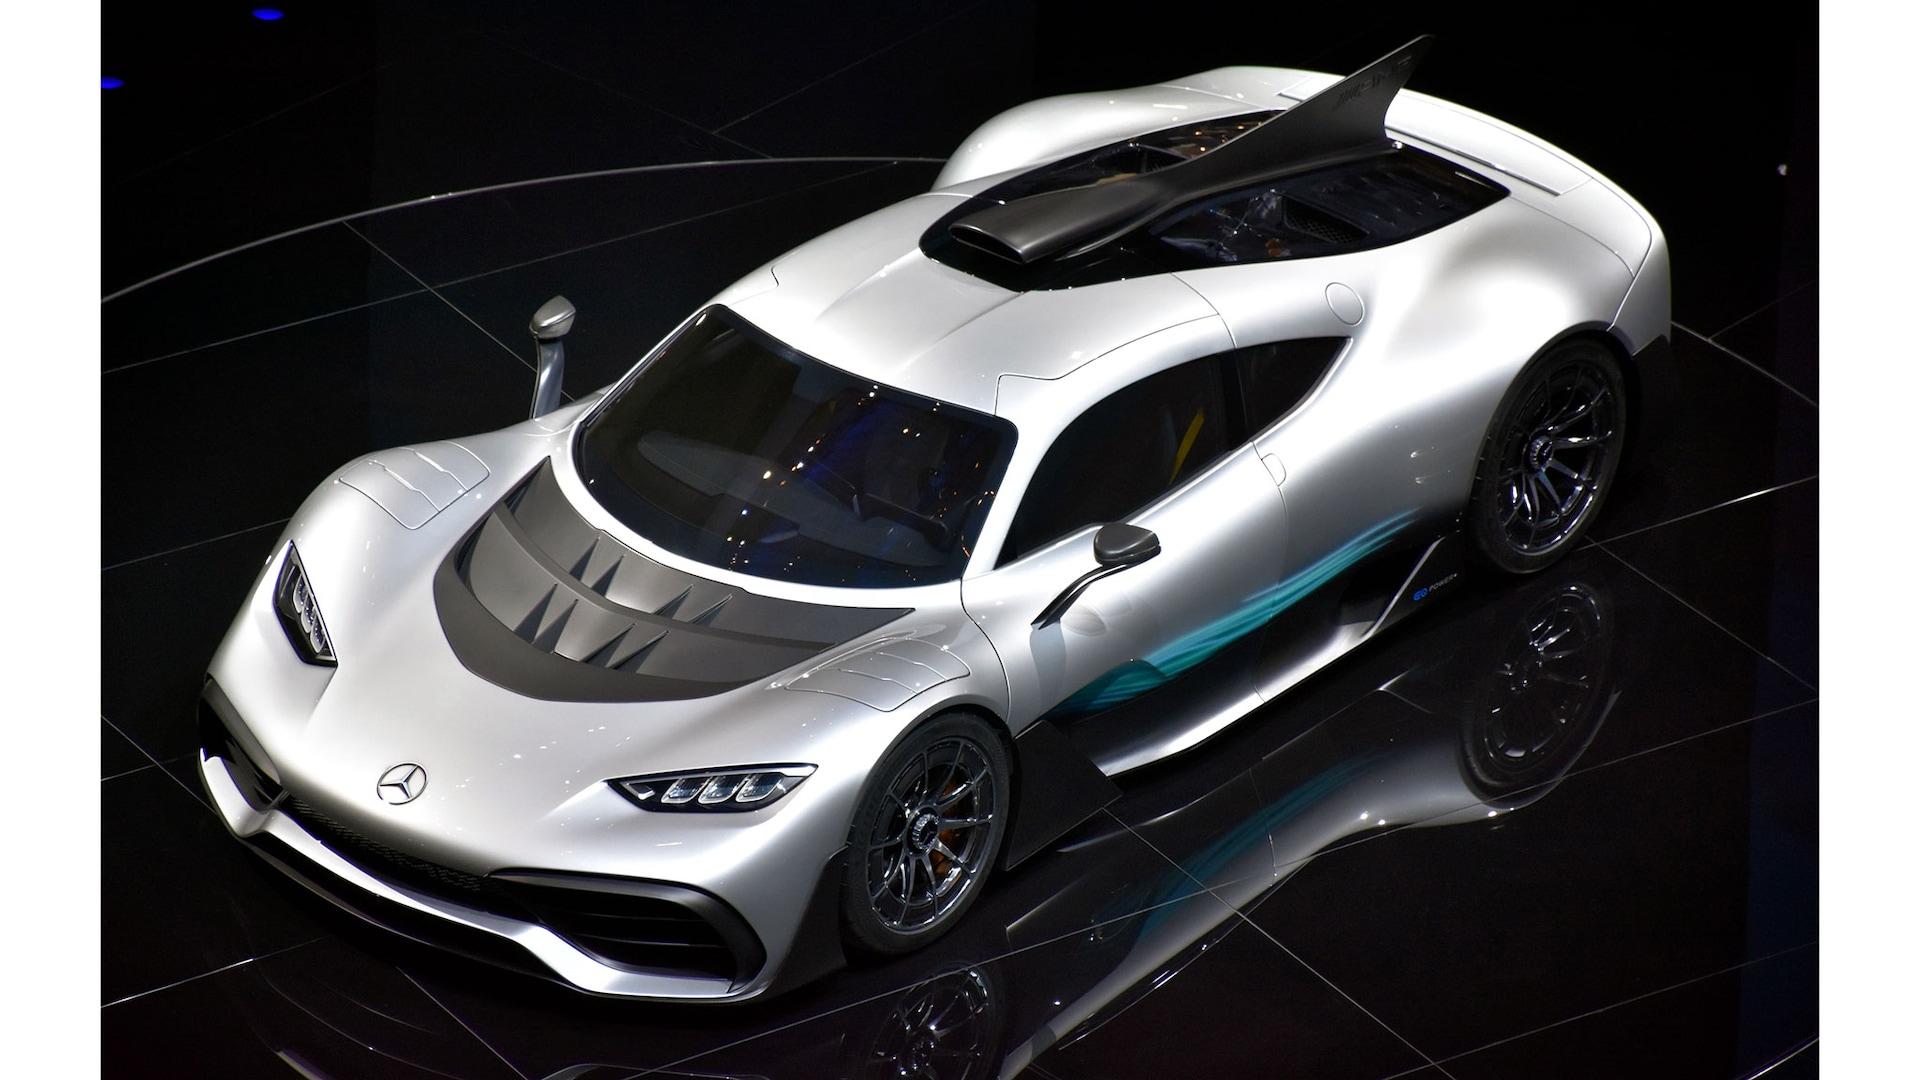 110 Mercedes AMG Project ONE 2021 street legal Supercar